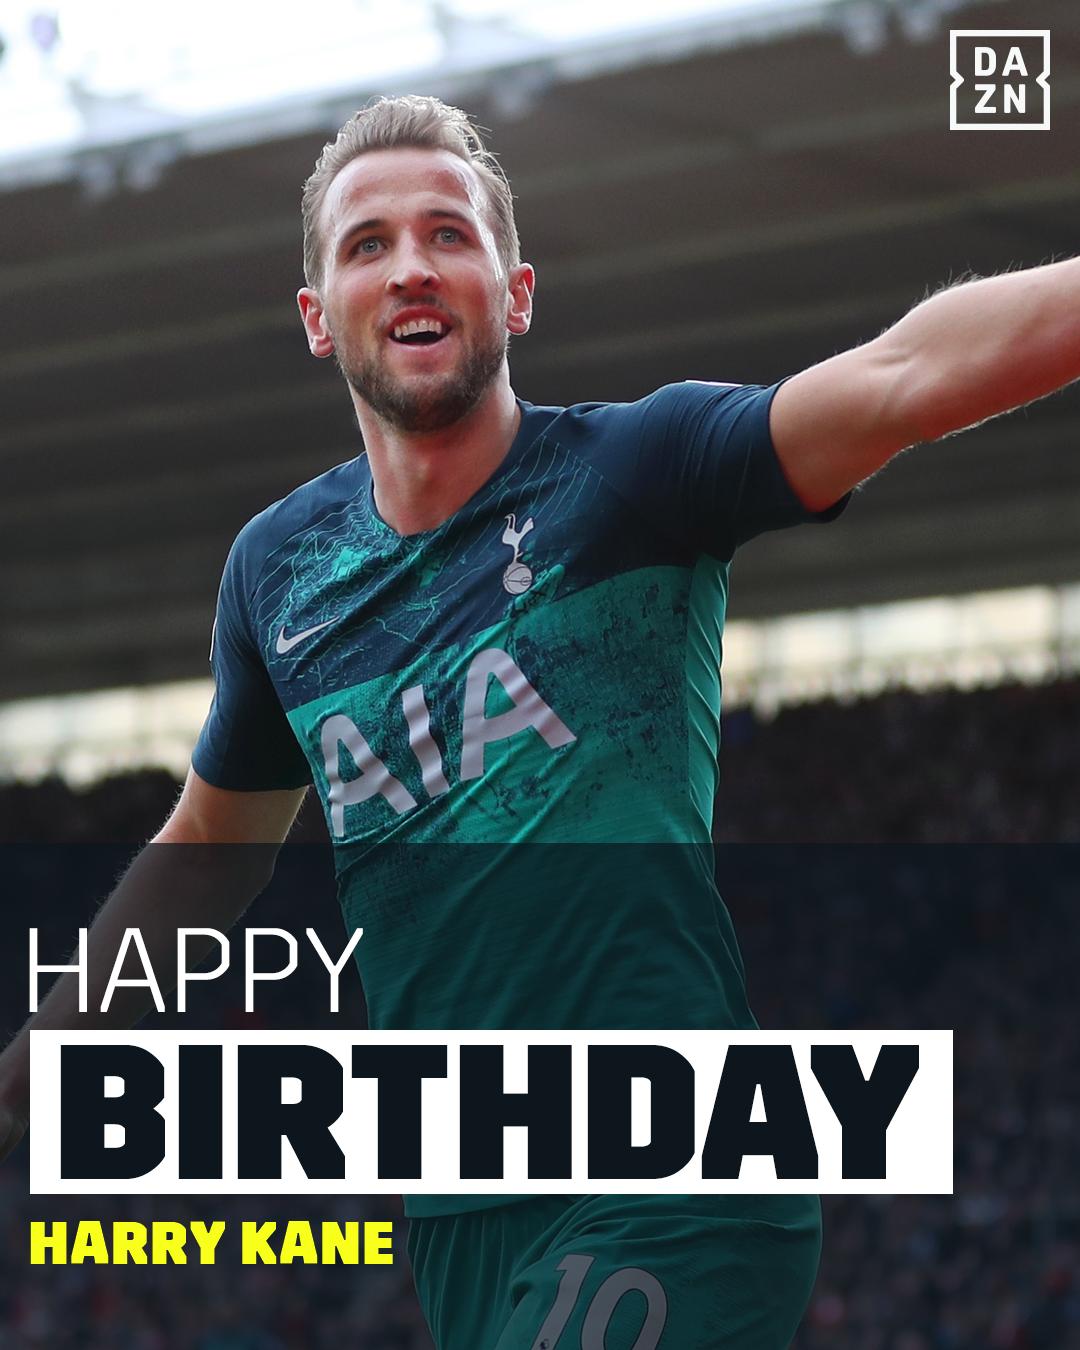  26 Years Old and 125 Goals to His Ledger

Happy Birthday, Harry Kane 